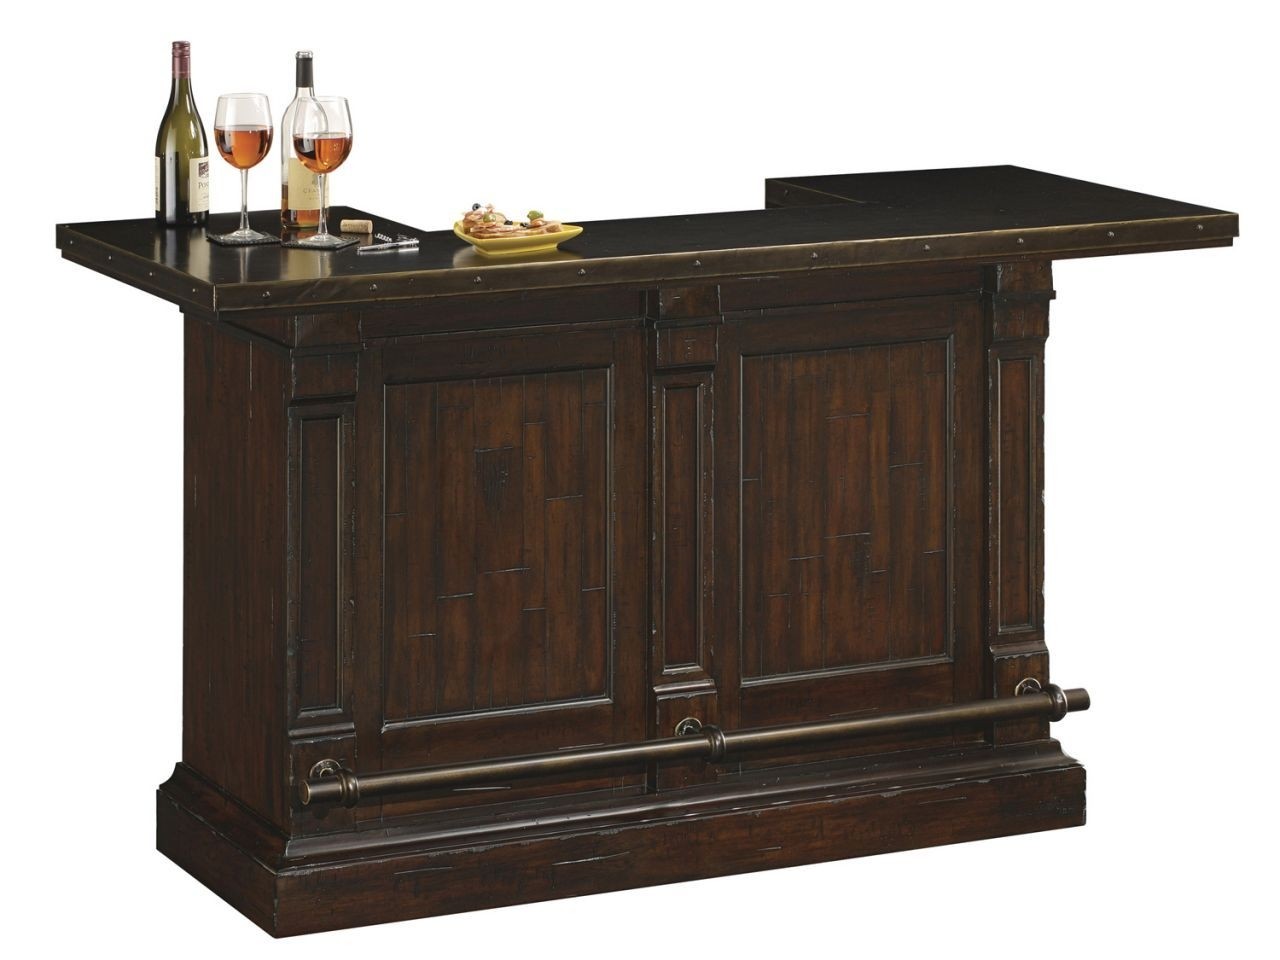 Stand alone bar simple yet sophistocated home bar